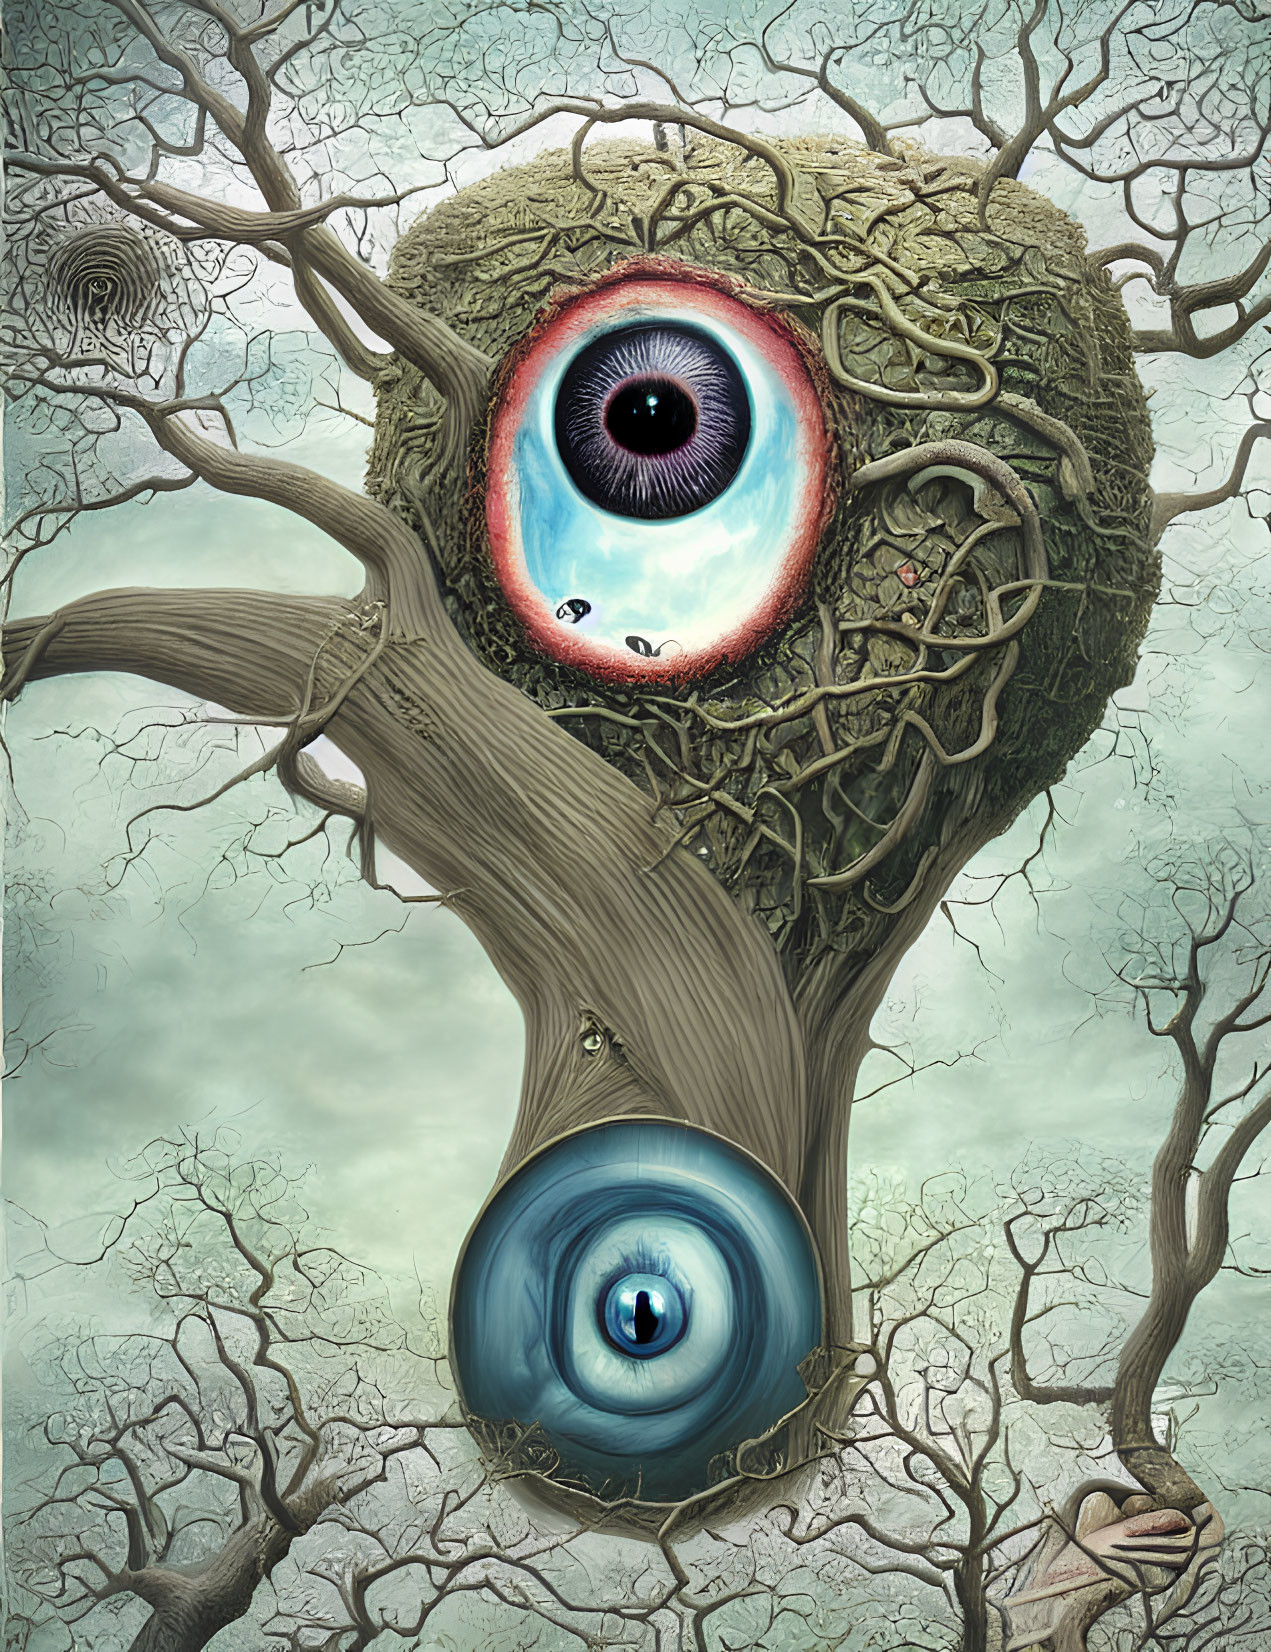 Surreal artwork: Tree branches create intricate patterns around vivid red and blue eyes on somber backdrop